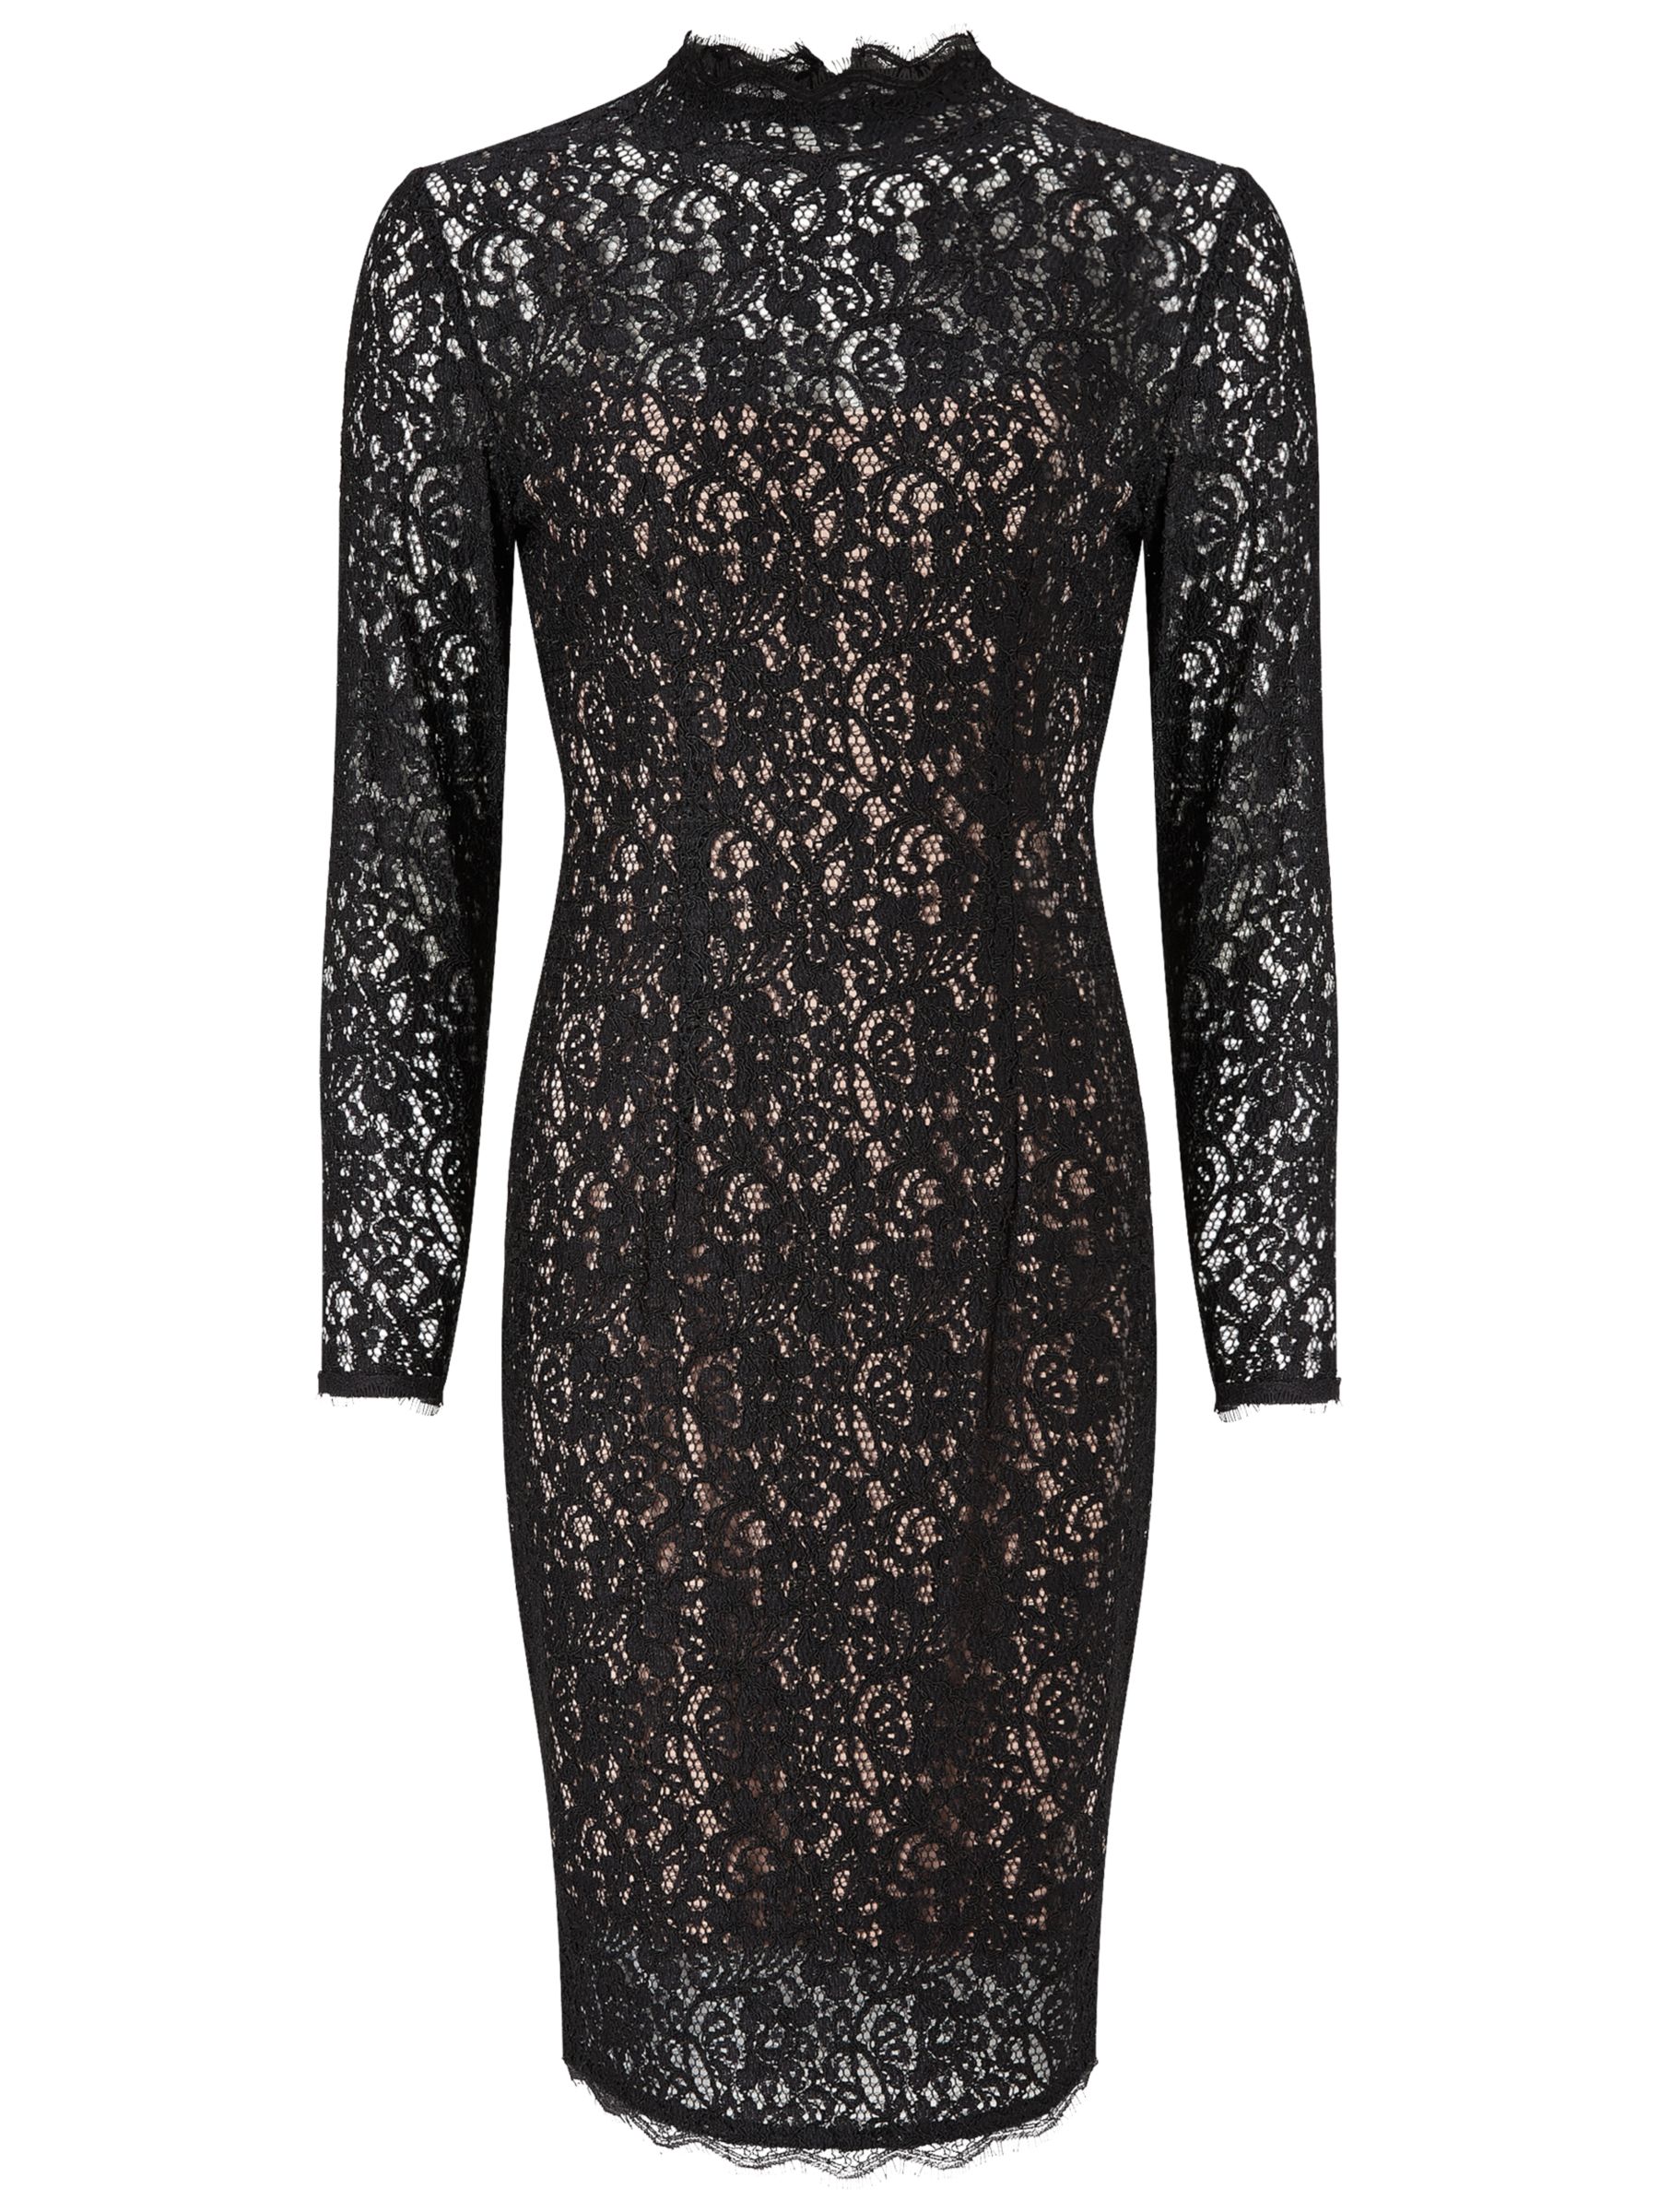 Adrianna Papell High Neck Lace Illusion Dress, Black/Nude at John Lewis ...